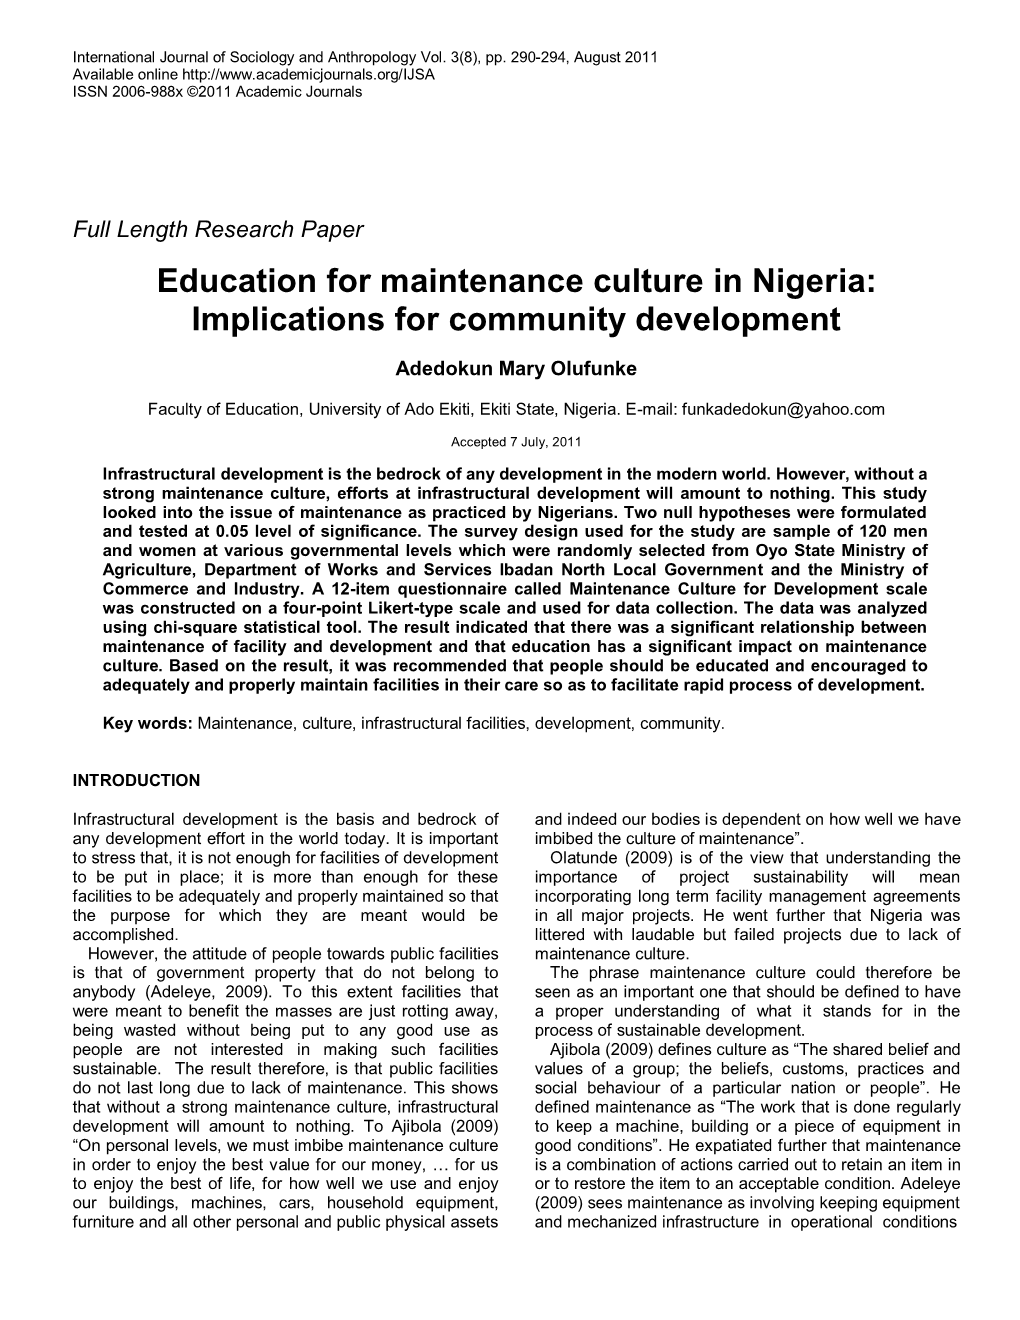 Education for Maintenance Culture in Nigeria: Implications for Community Development